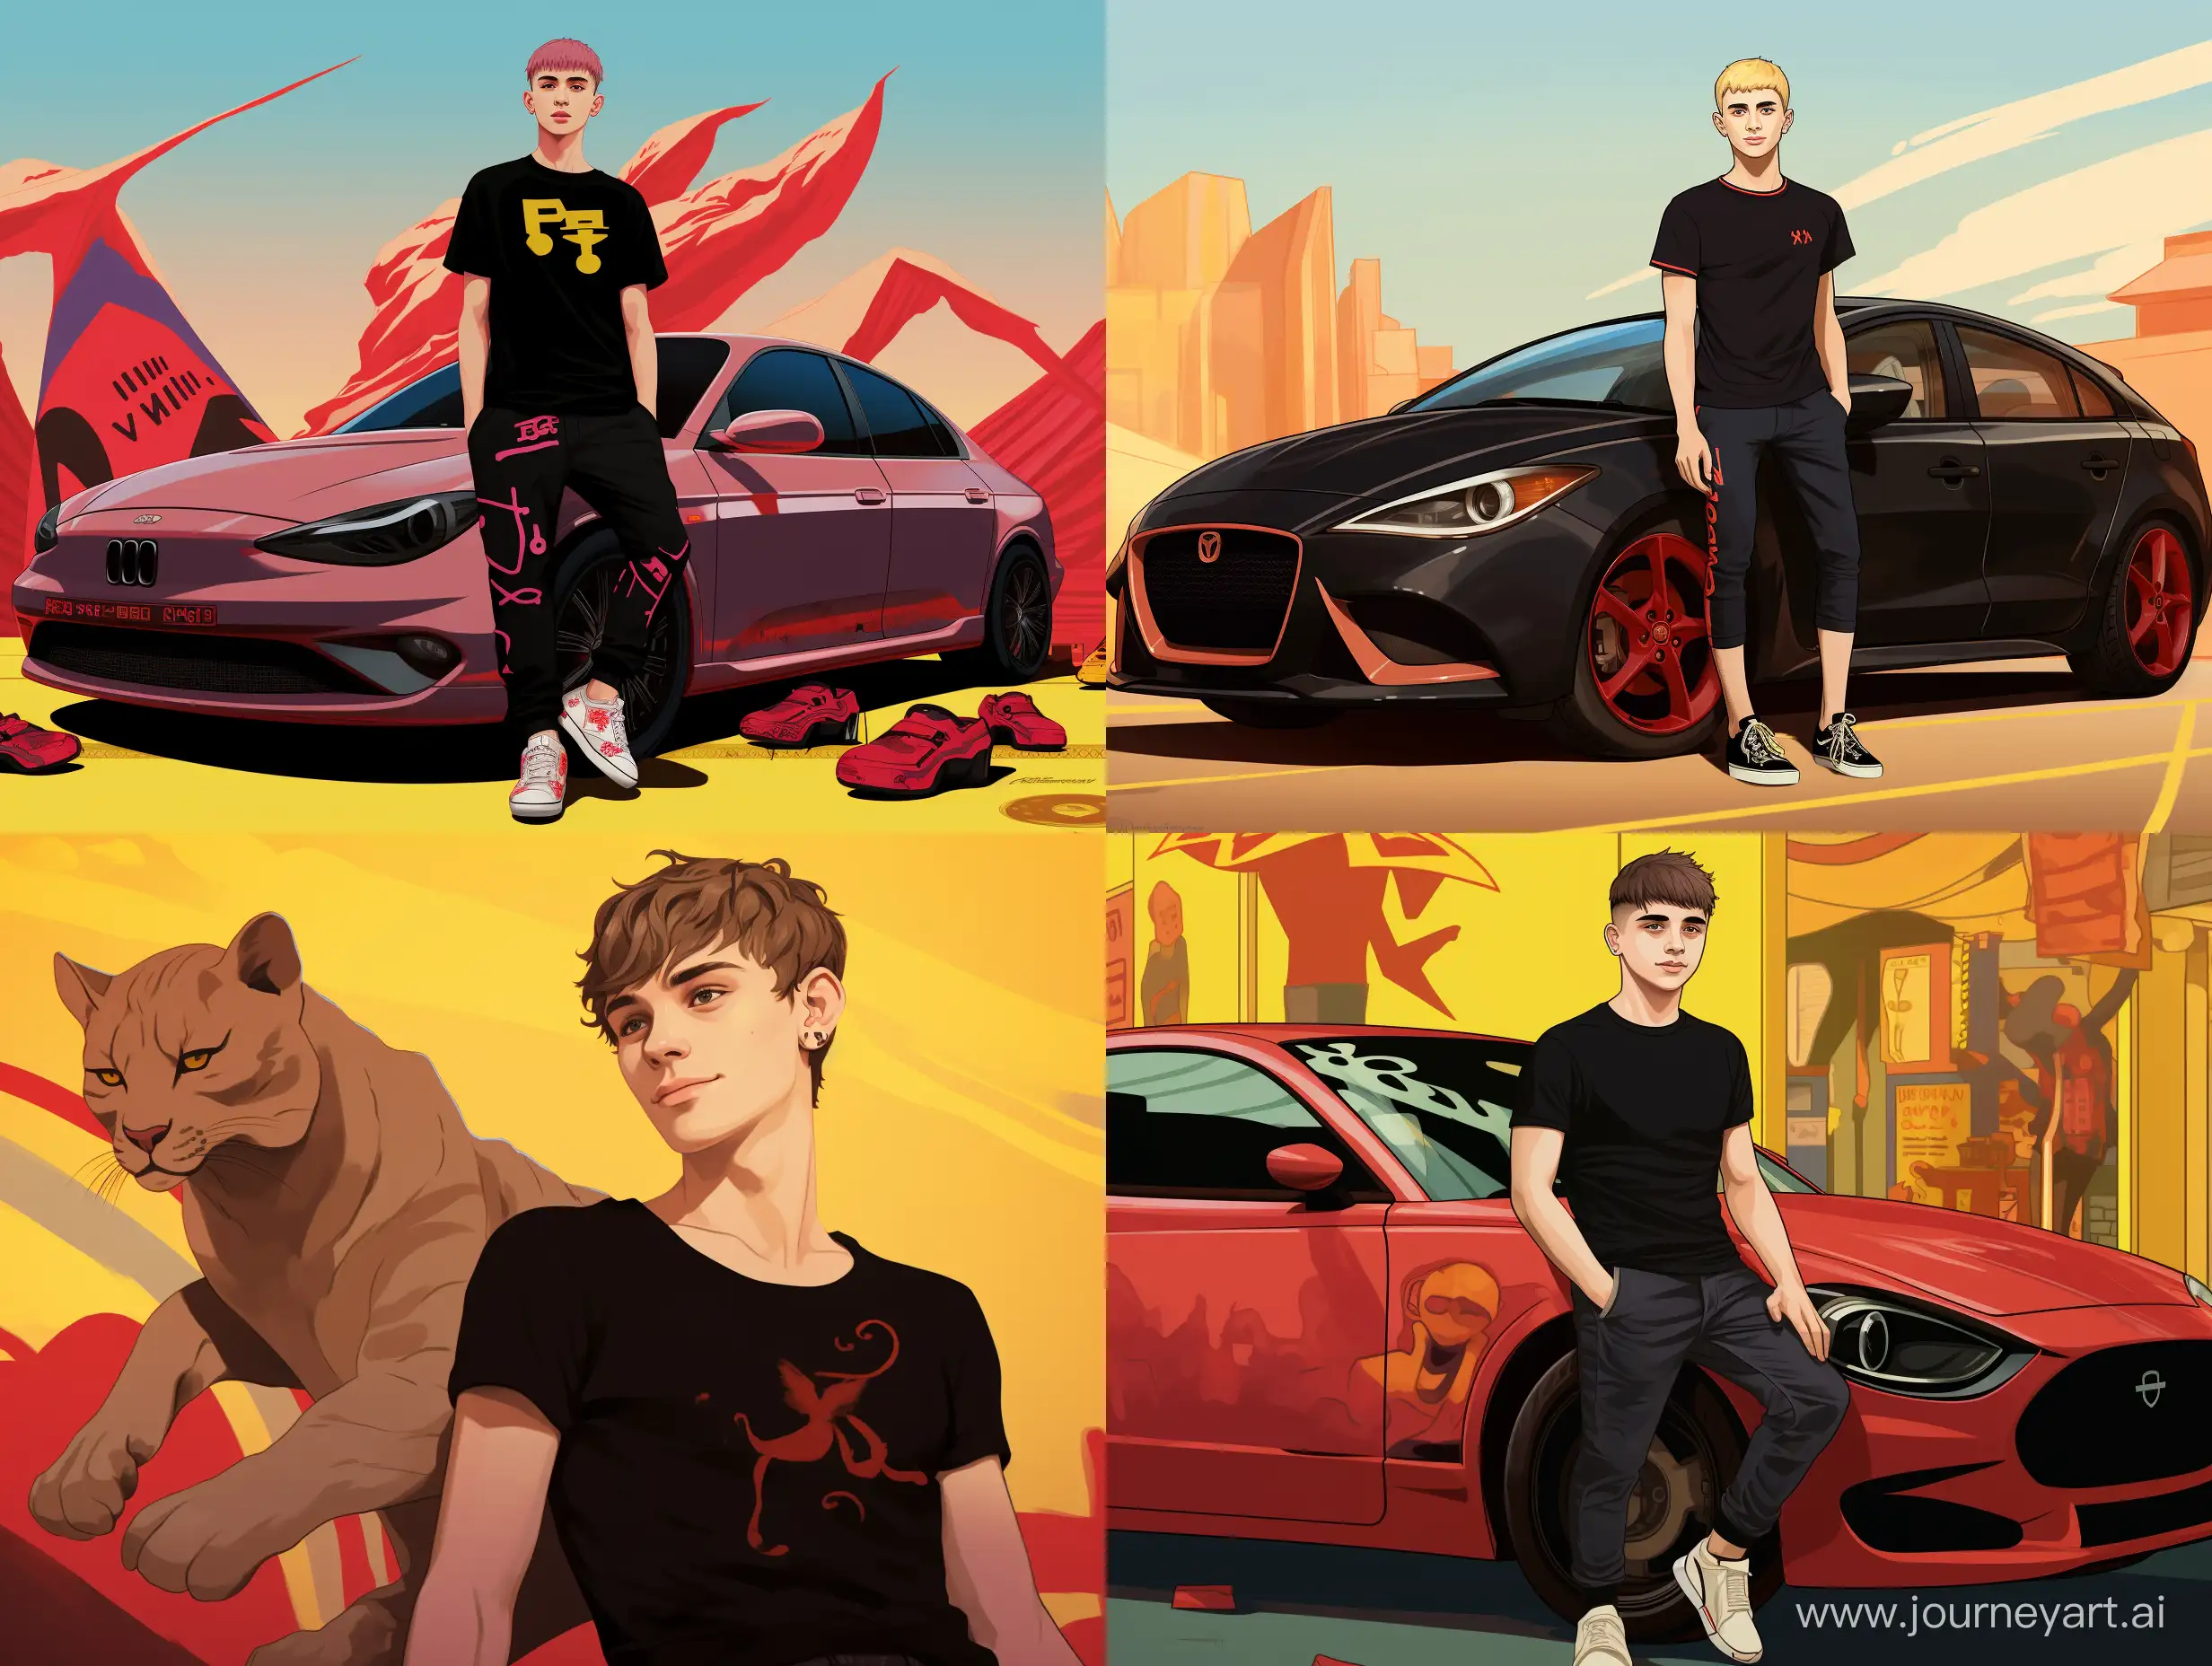 Photographic detail of a young man with a round face, short hair shaved neatly to the side, wearing a black t-shirt, long torn jeans, yellow shoes, standing posing in front of a yellow and black Jaguar F-Type car. On the shield and floating red and black ribbon is written "OYO POENK". the background is light 